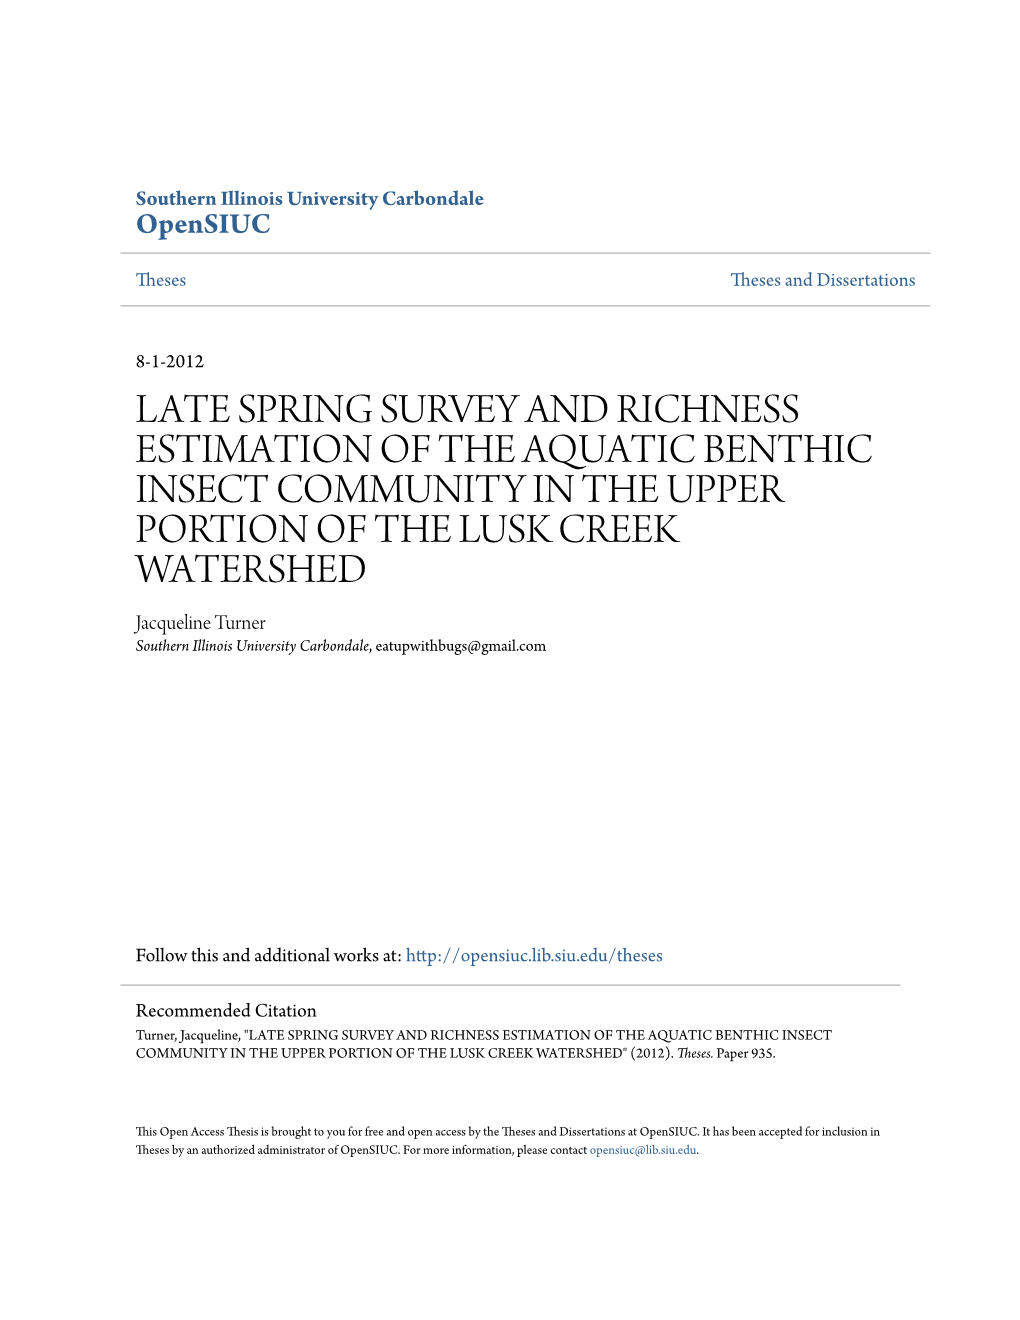 Late Spring Survey and Richness Estimation of The